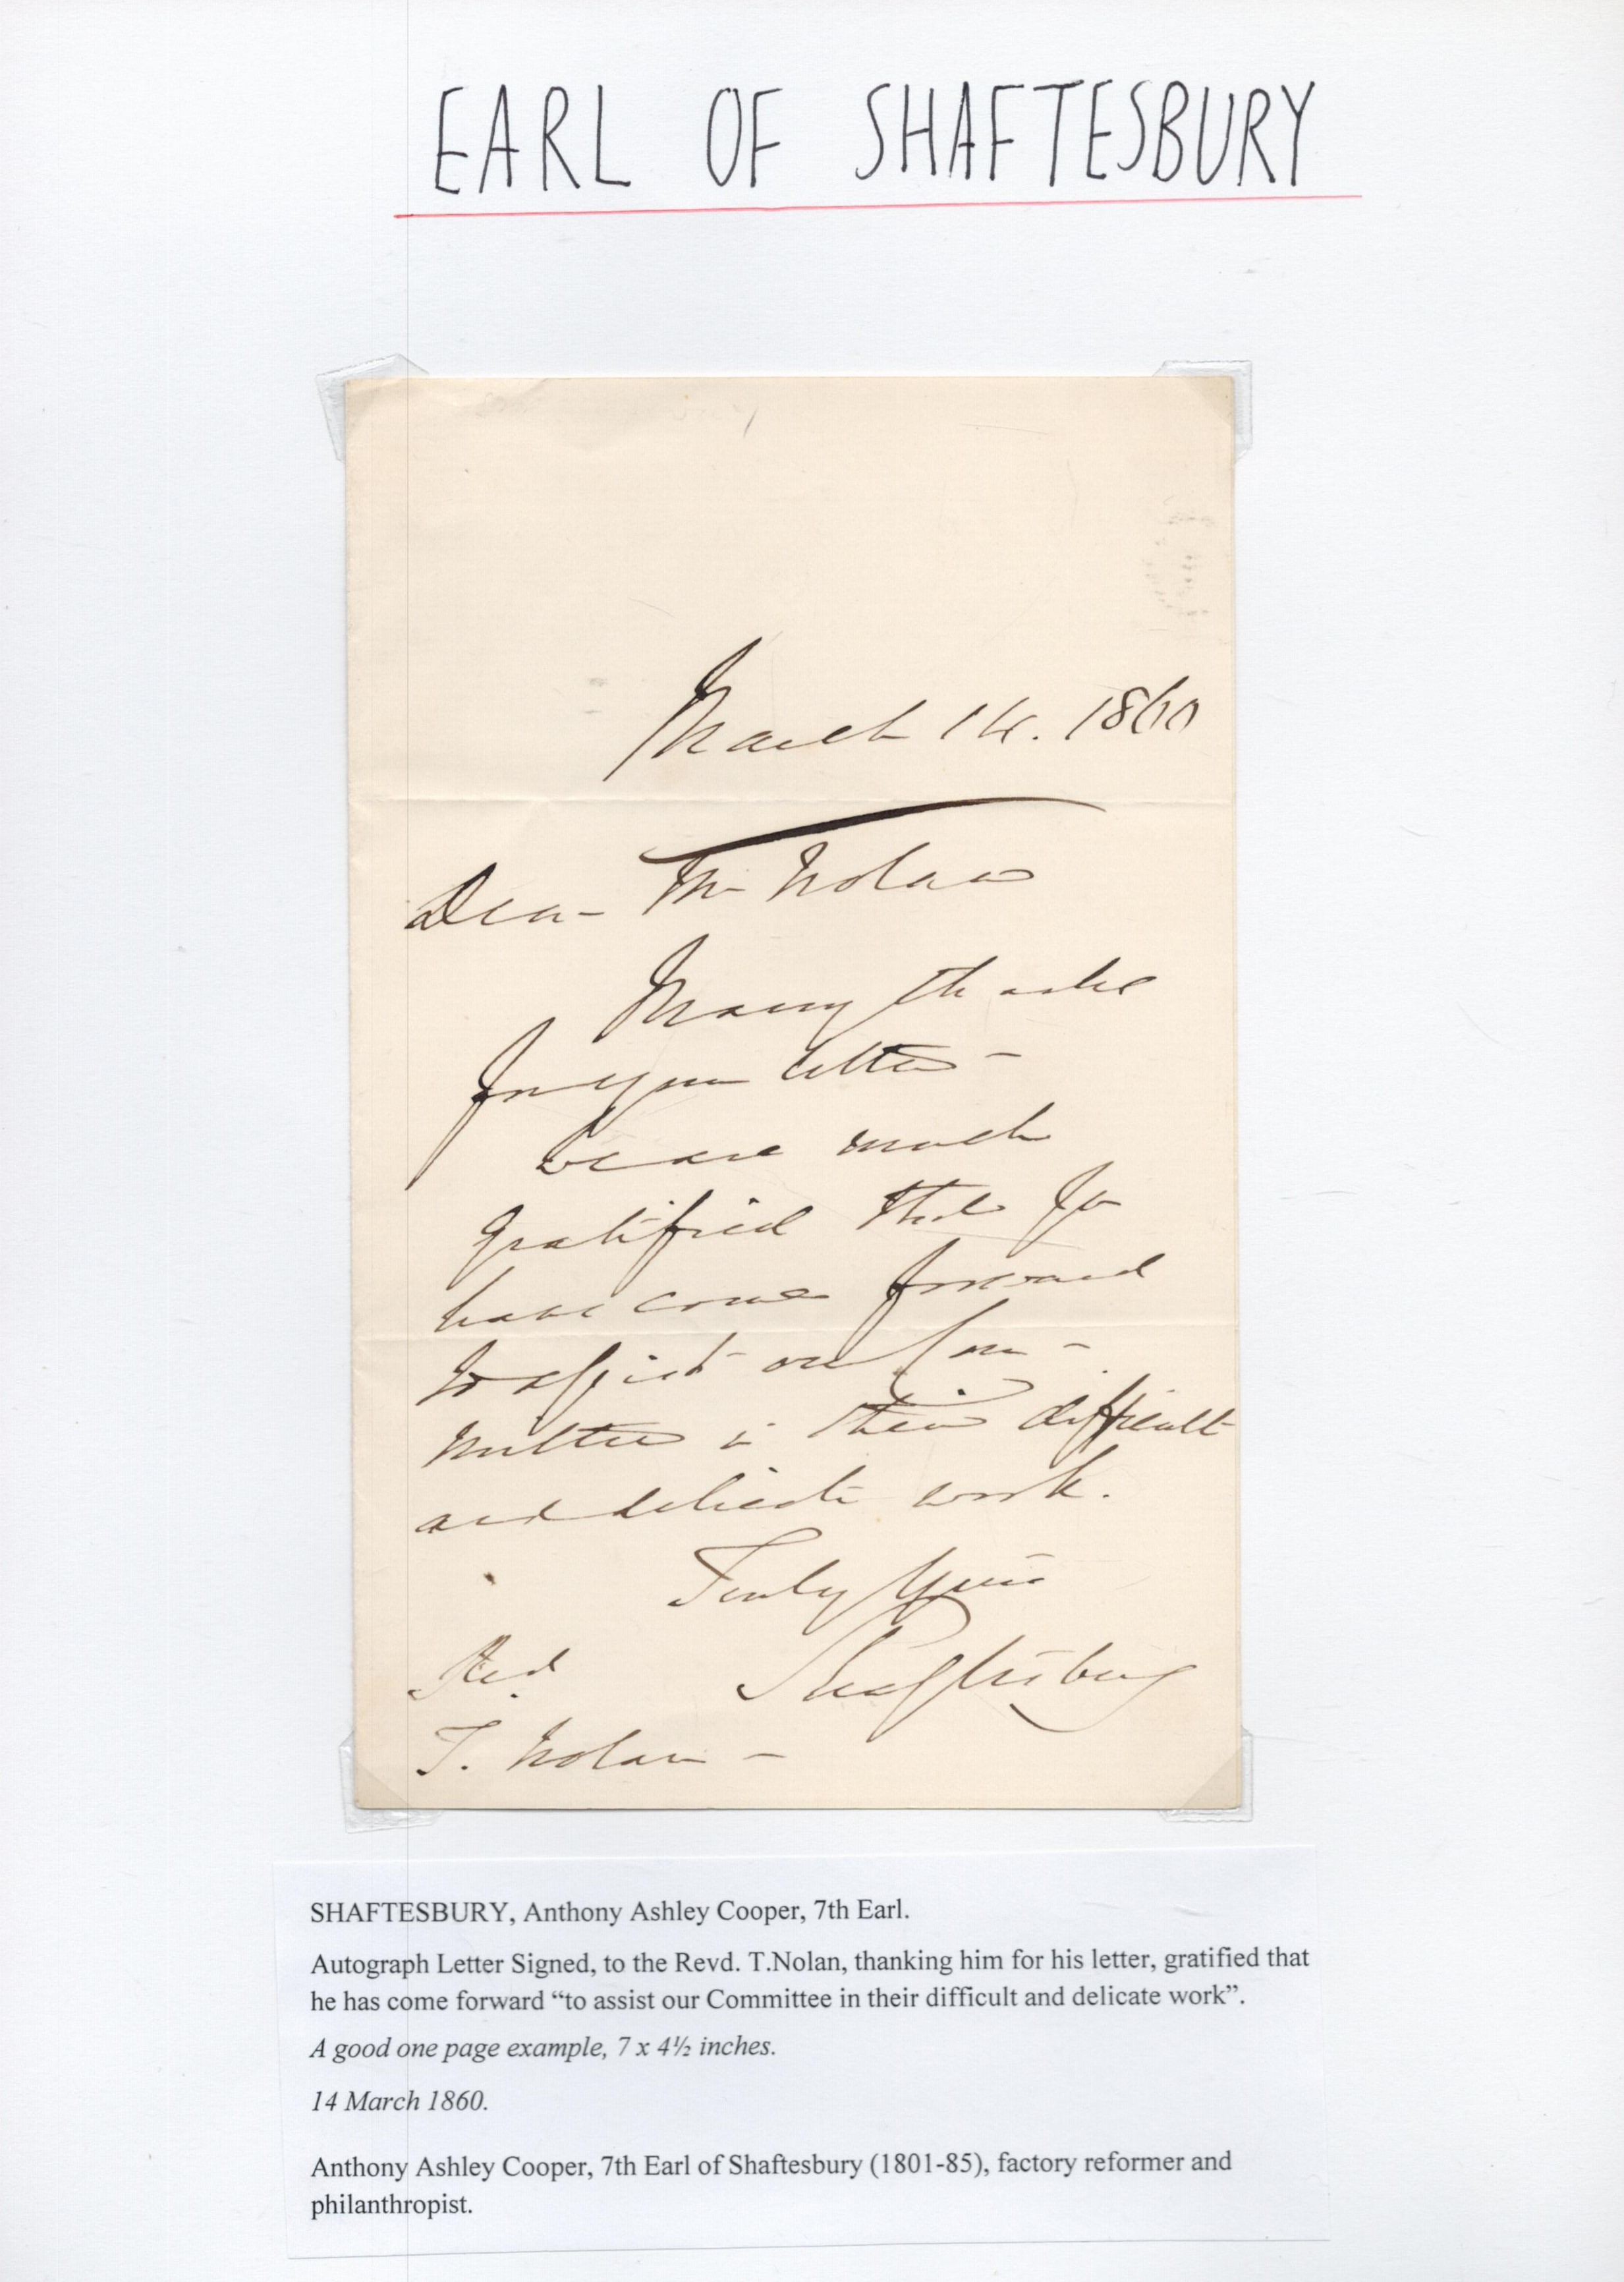 Anthony Ashley Cooper, 1st Earl of Shaftesbury Signed ALS Dated March 14th 1860. Written in black